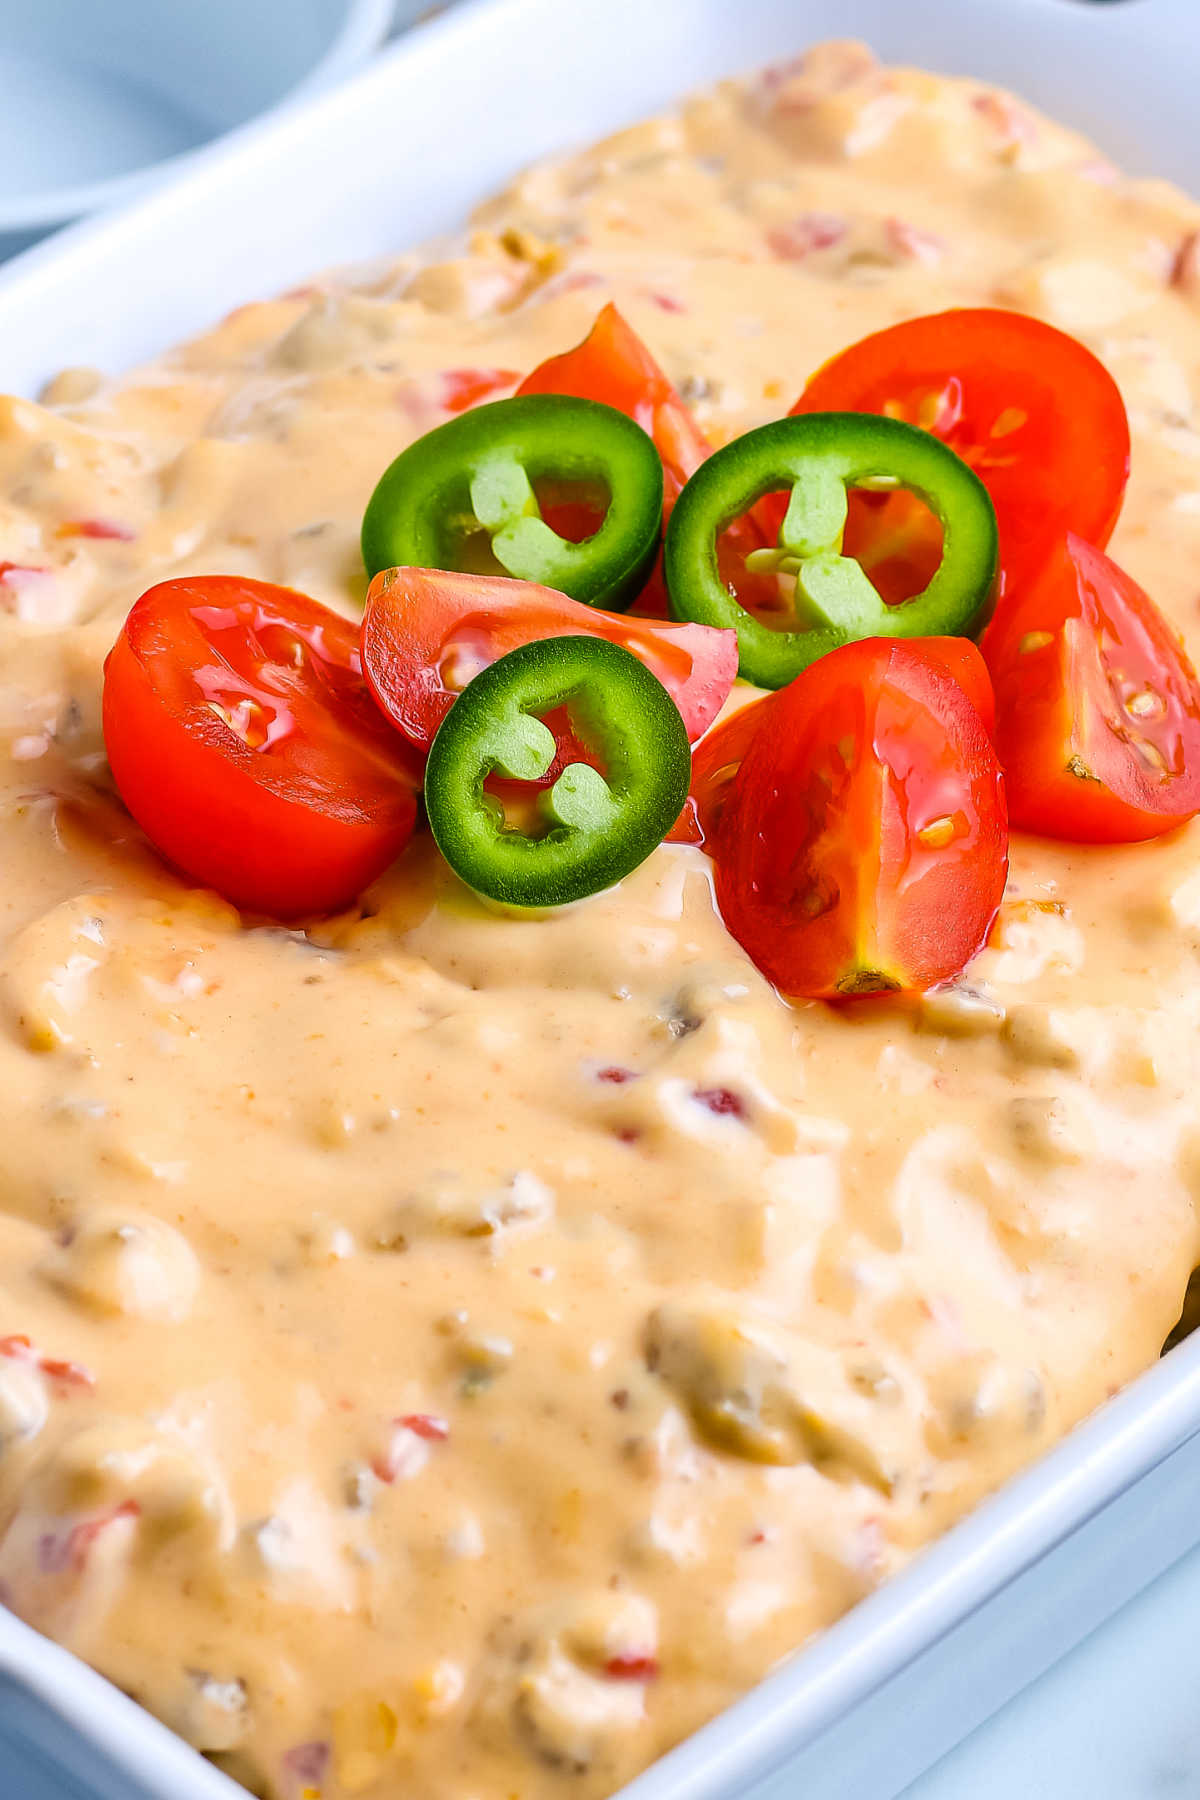 A close up picture of the finished Rotel Cheese Dip.